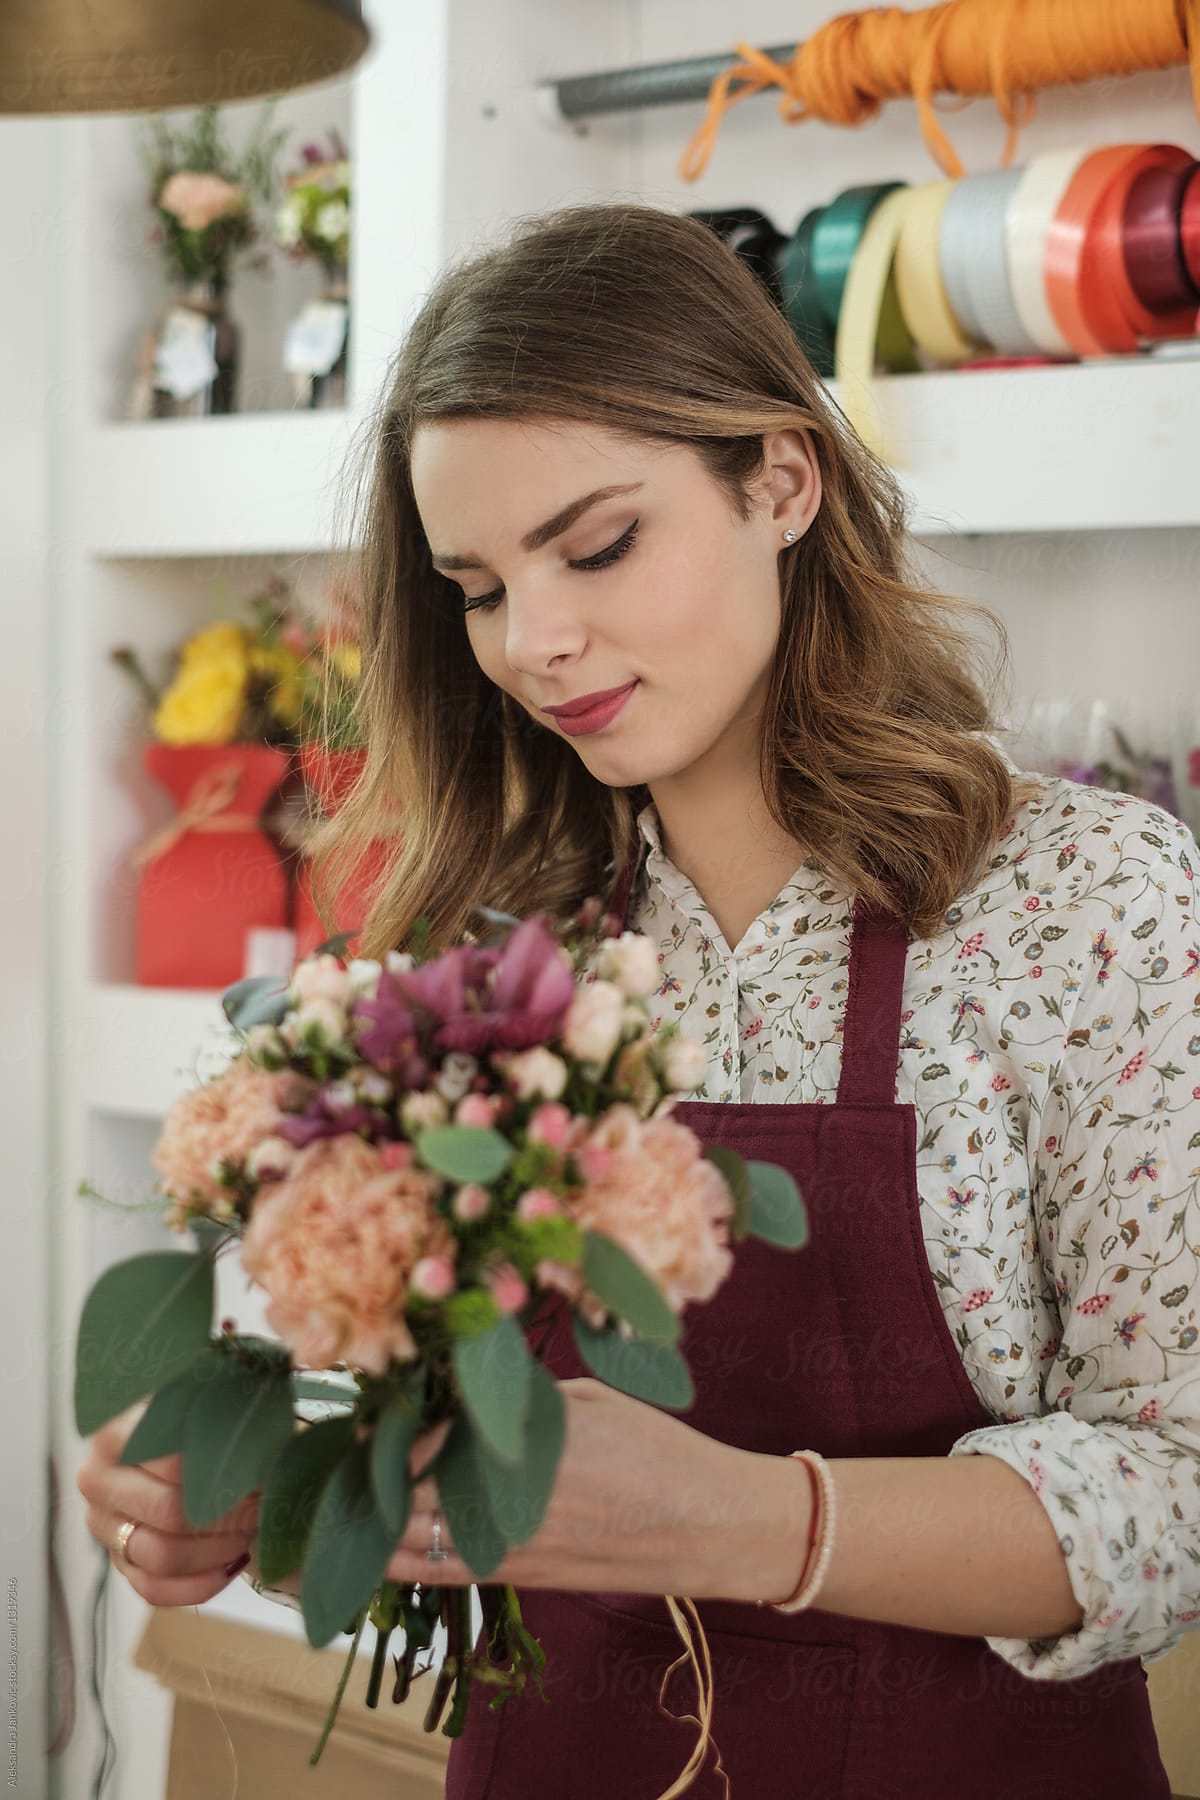 Female Florist Arranging Flowers At The Shop By Stocksy Contributor